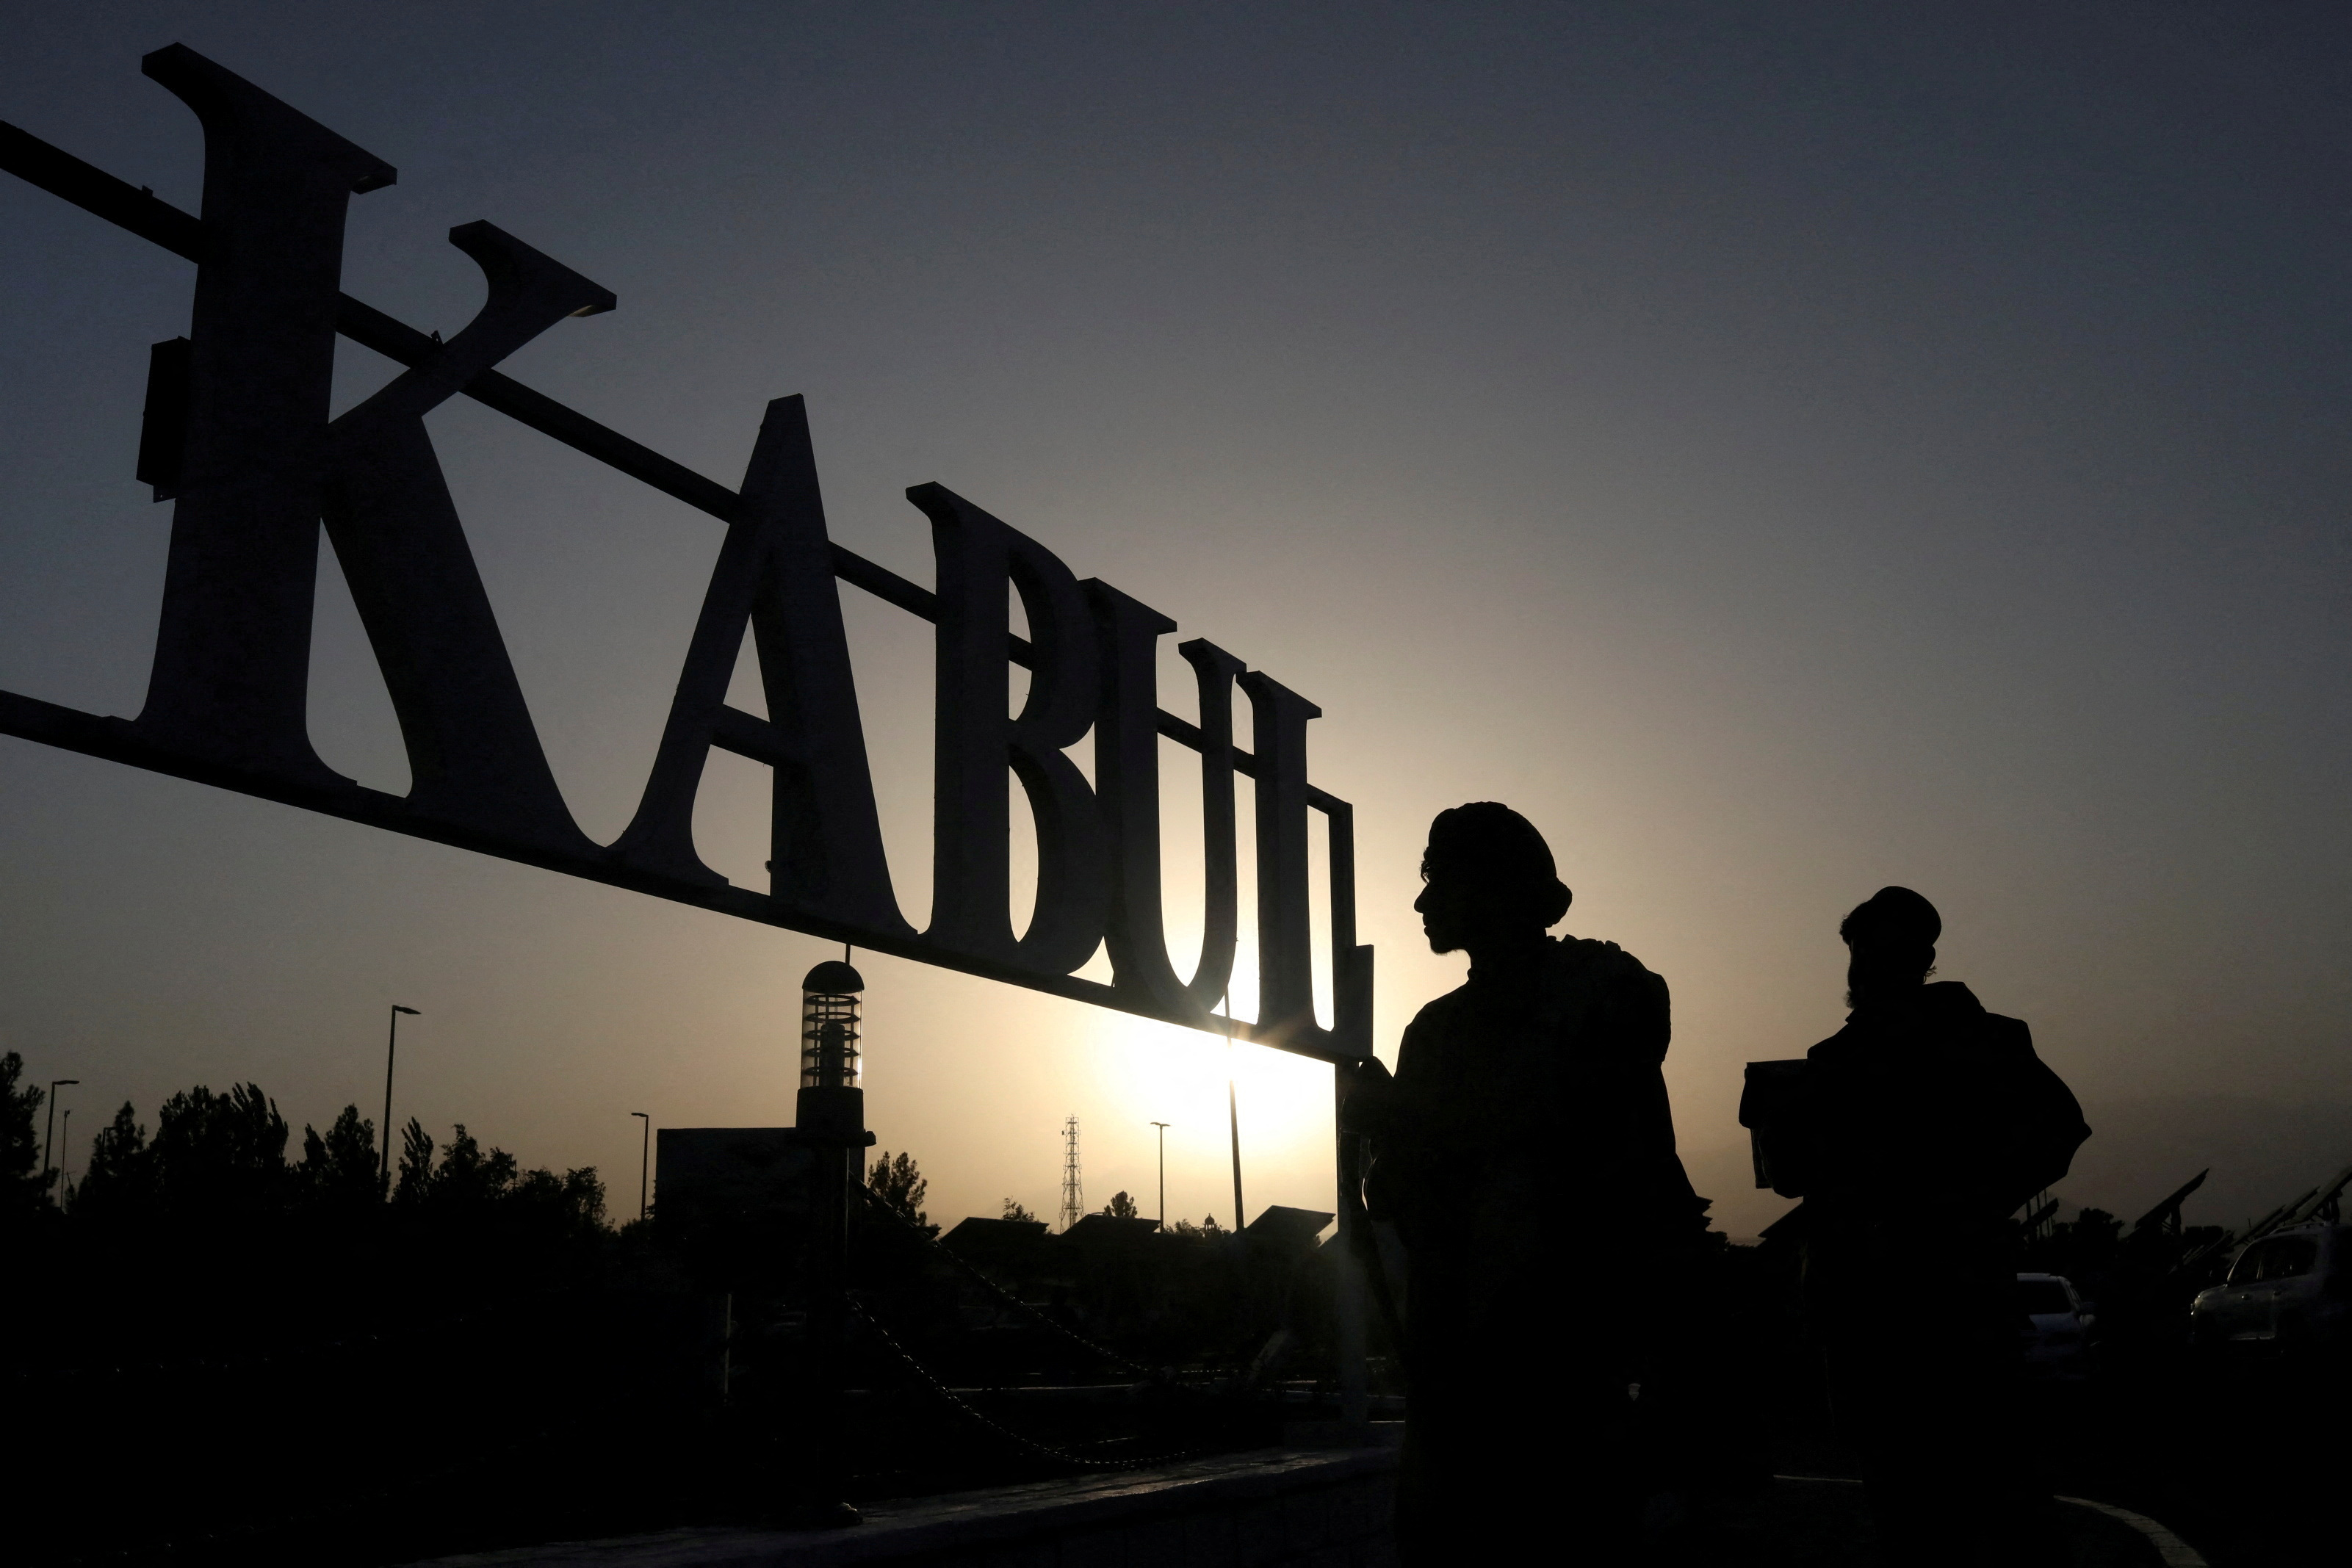 Taliban soldiers stand in front of a sign at the international airport in Kabul